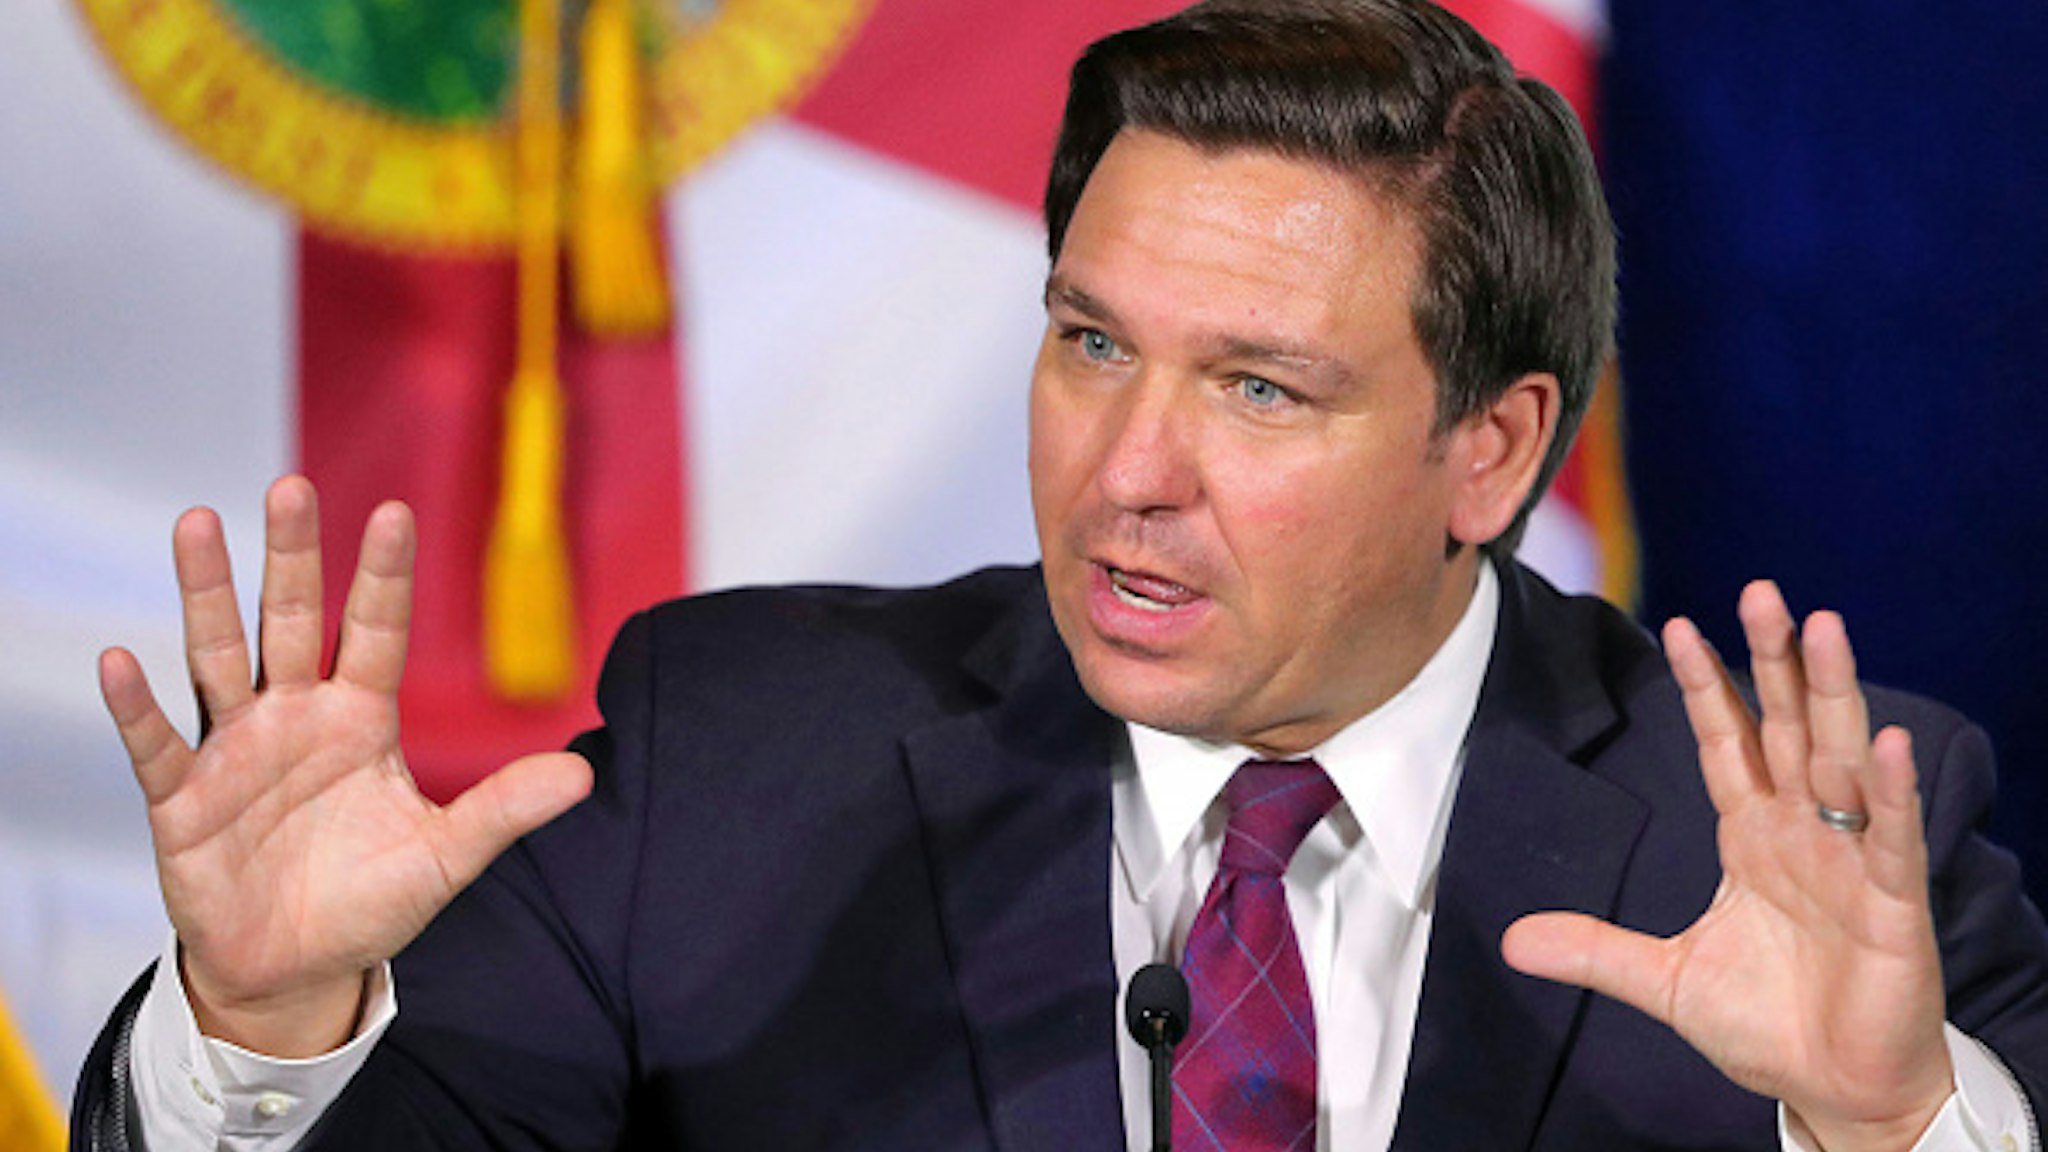 Governor Ron DeSantis delivers remarks during a roundtable discussion with theme park leaders about safety protocols and the impact of the coronavirus pandemic, Wednesday, August 26, 2020. Executives from Walt Disney World, Universal Orlando and SeaWorld Orlando participated.